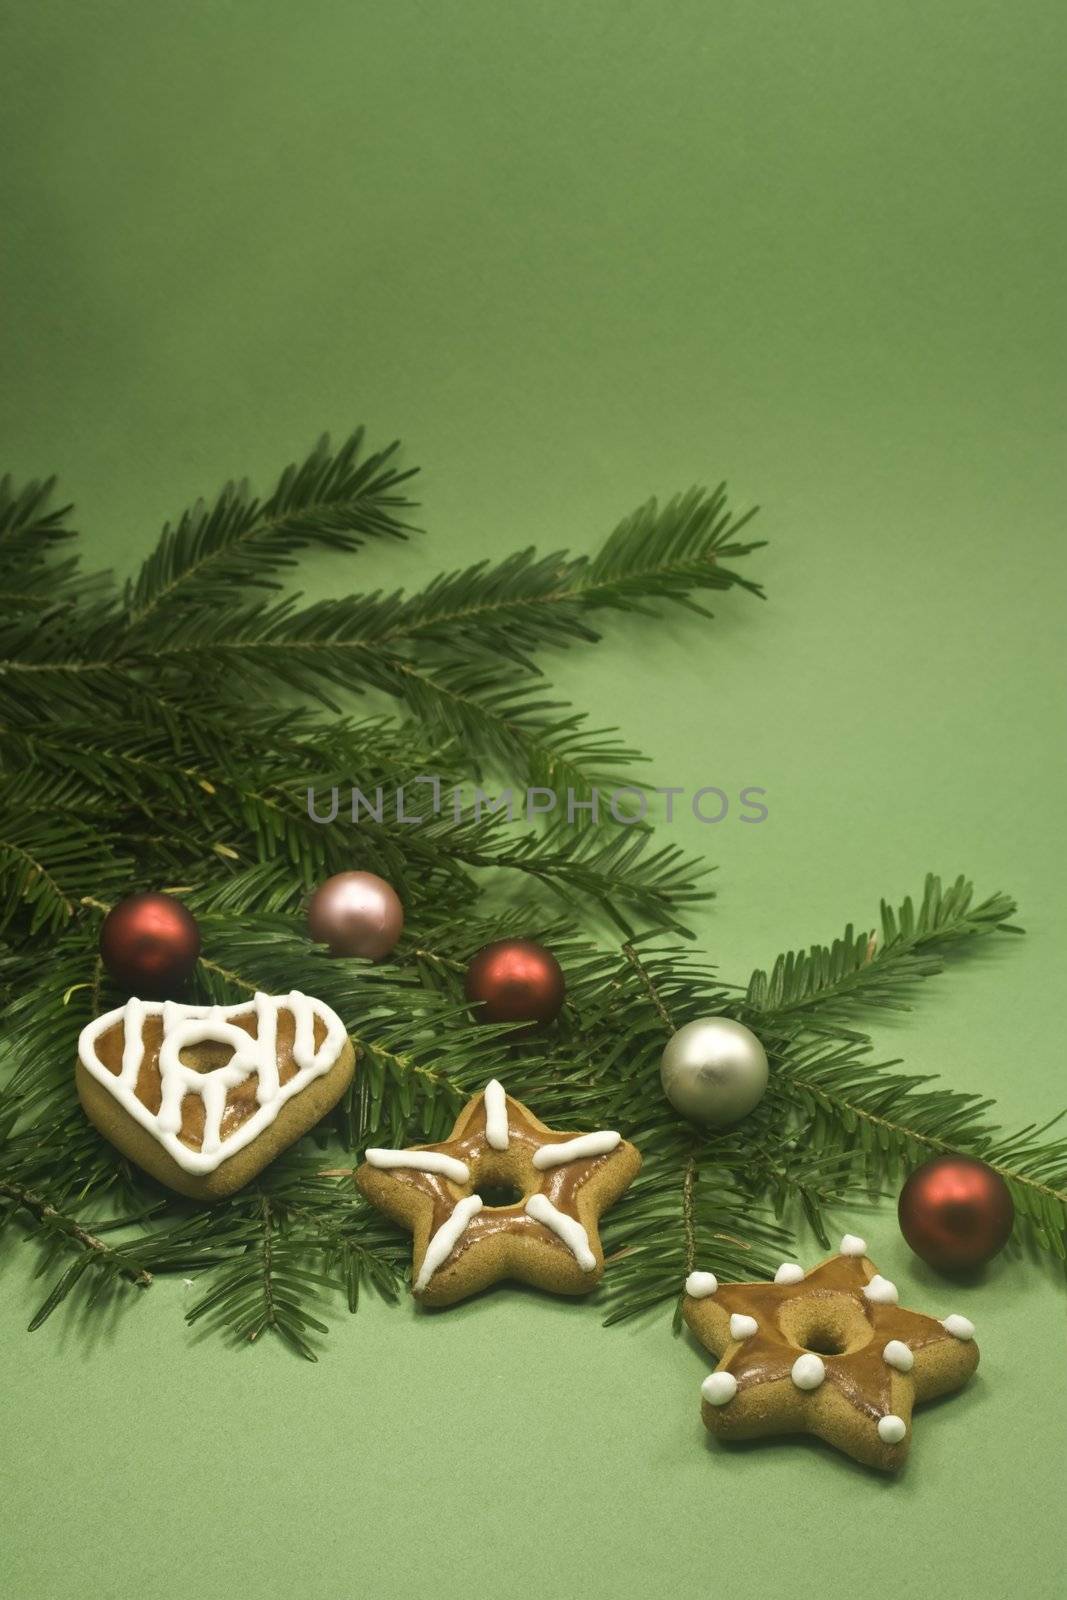 Three cookies and five shiny balls on fir branch isolated on green paper